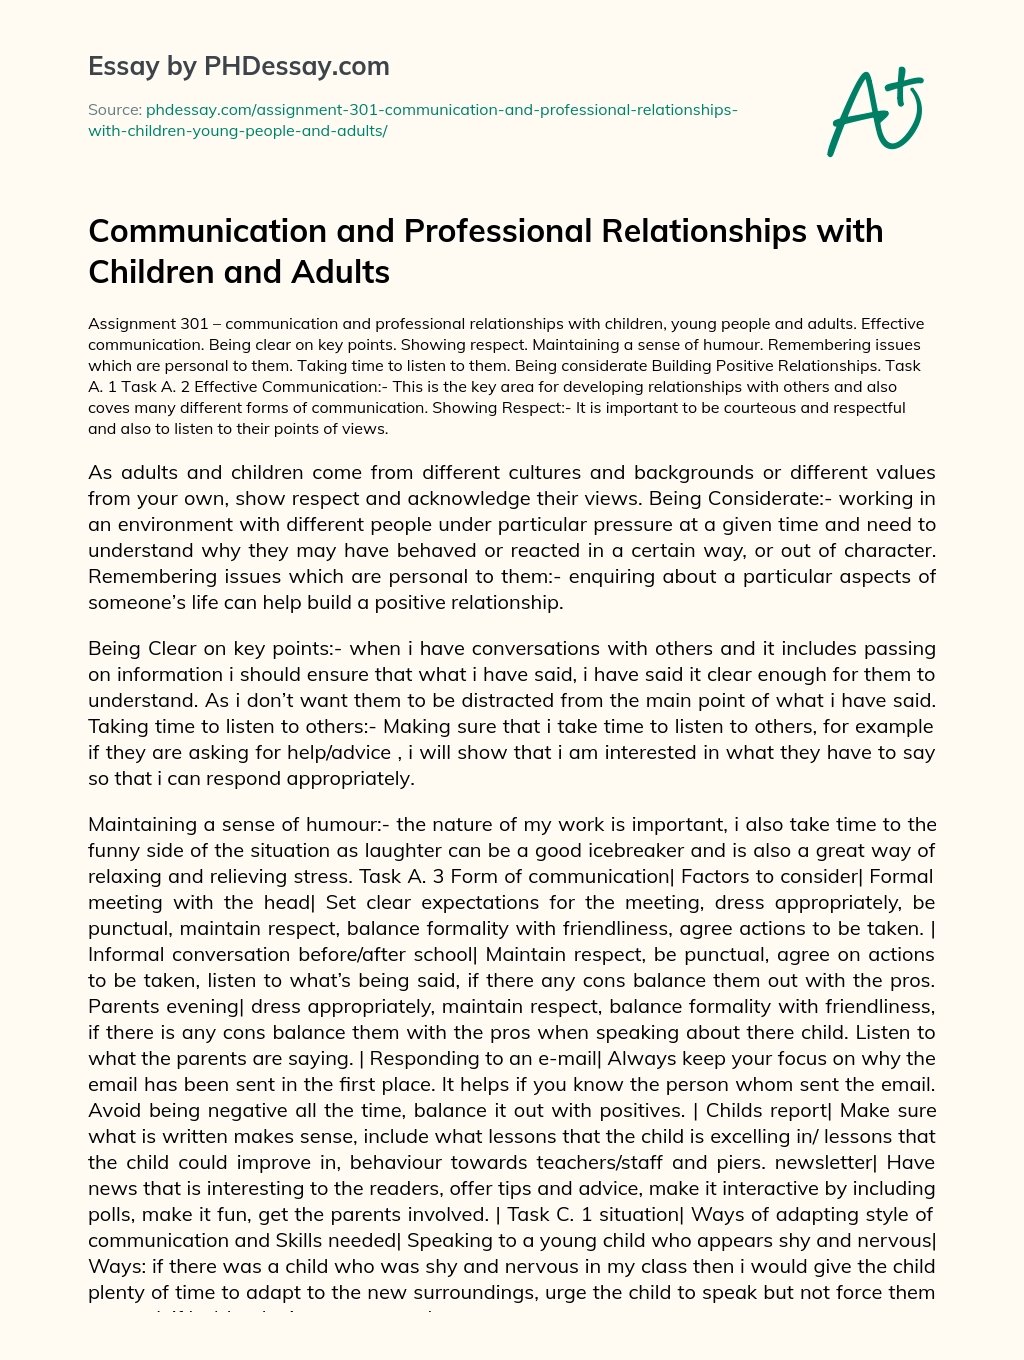 Communication and Professional Relationships with Children and Adults essay